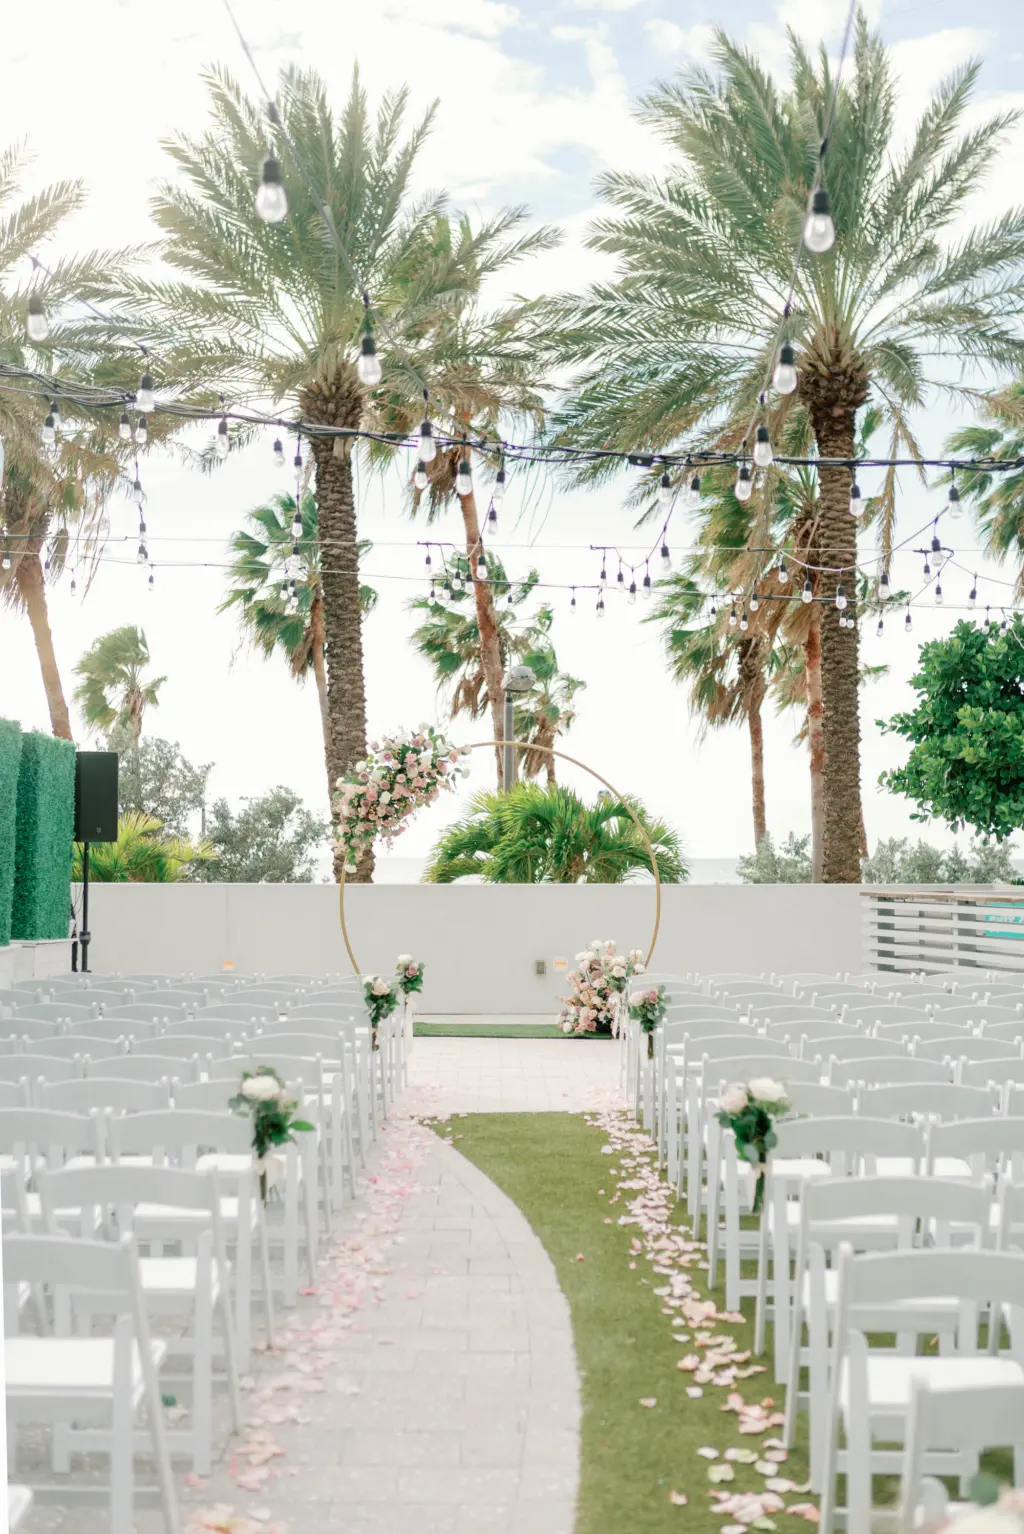 Gold Circle Arch Wedding Ceremony Ideas with Pink Flowers | White Folding Chairs in Outdoor Tropical Wedding | Venue Wyndham Grand Clearwater Beach